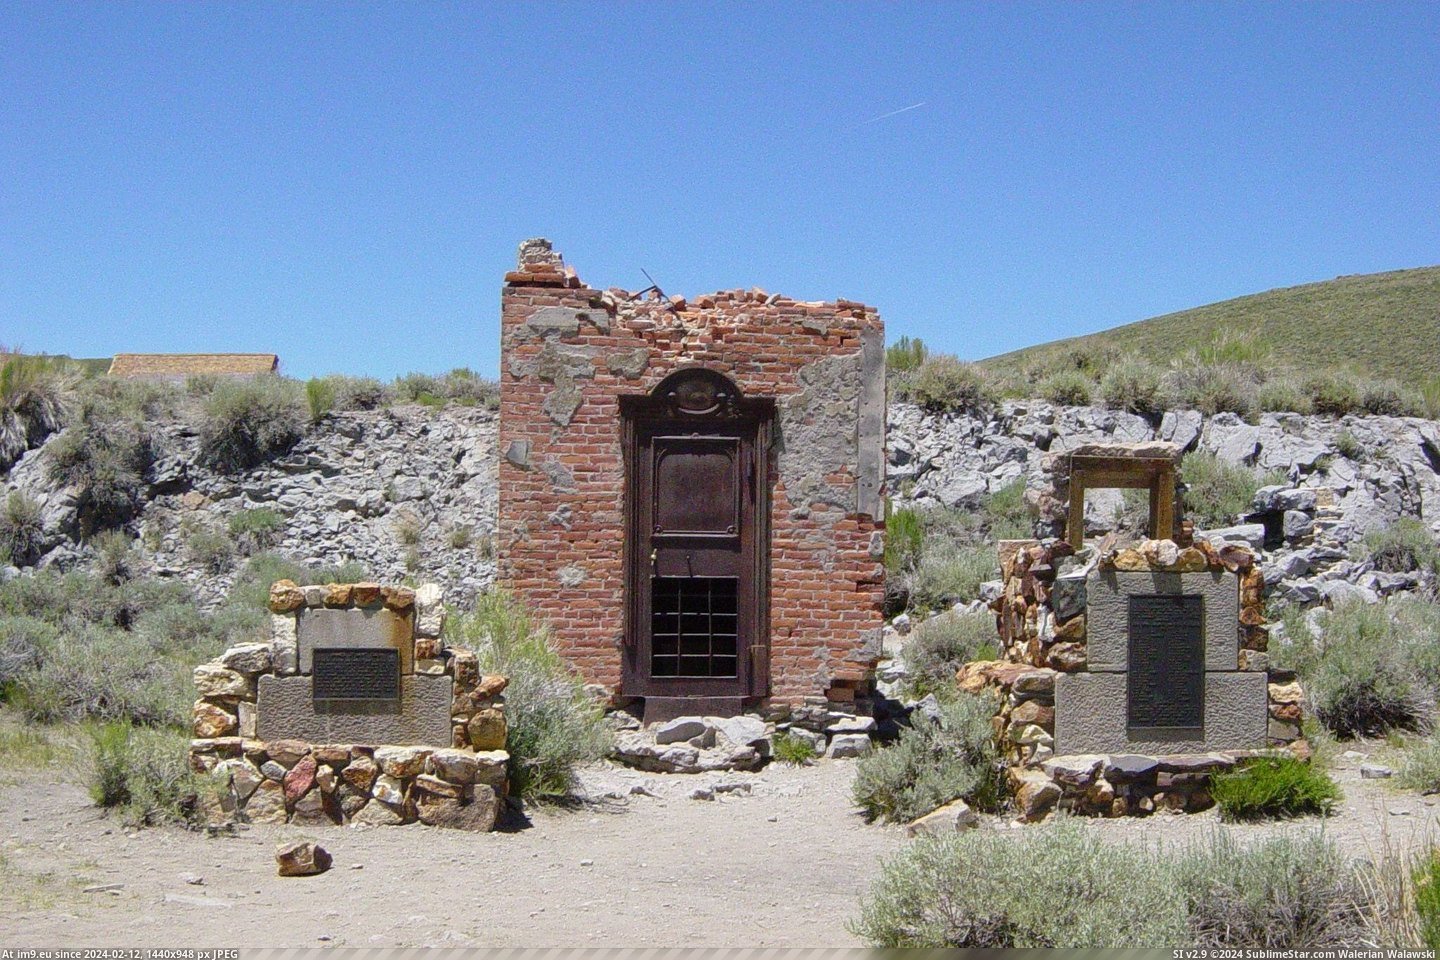 #California #Bodie #Bank #Ruins Bodie Bank Ruins In Bodie, California Pic. (Изображение из альбом Bodie - a ghost town in Eastern California))